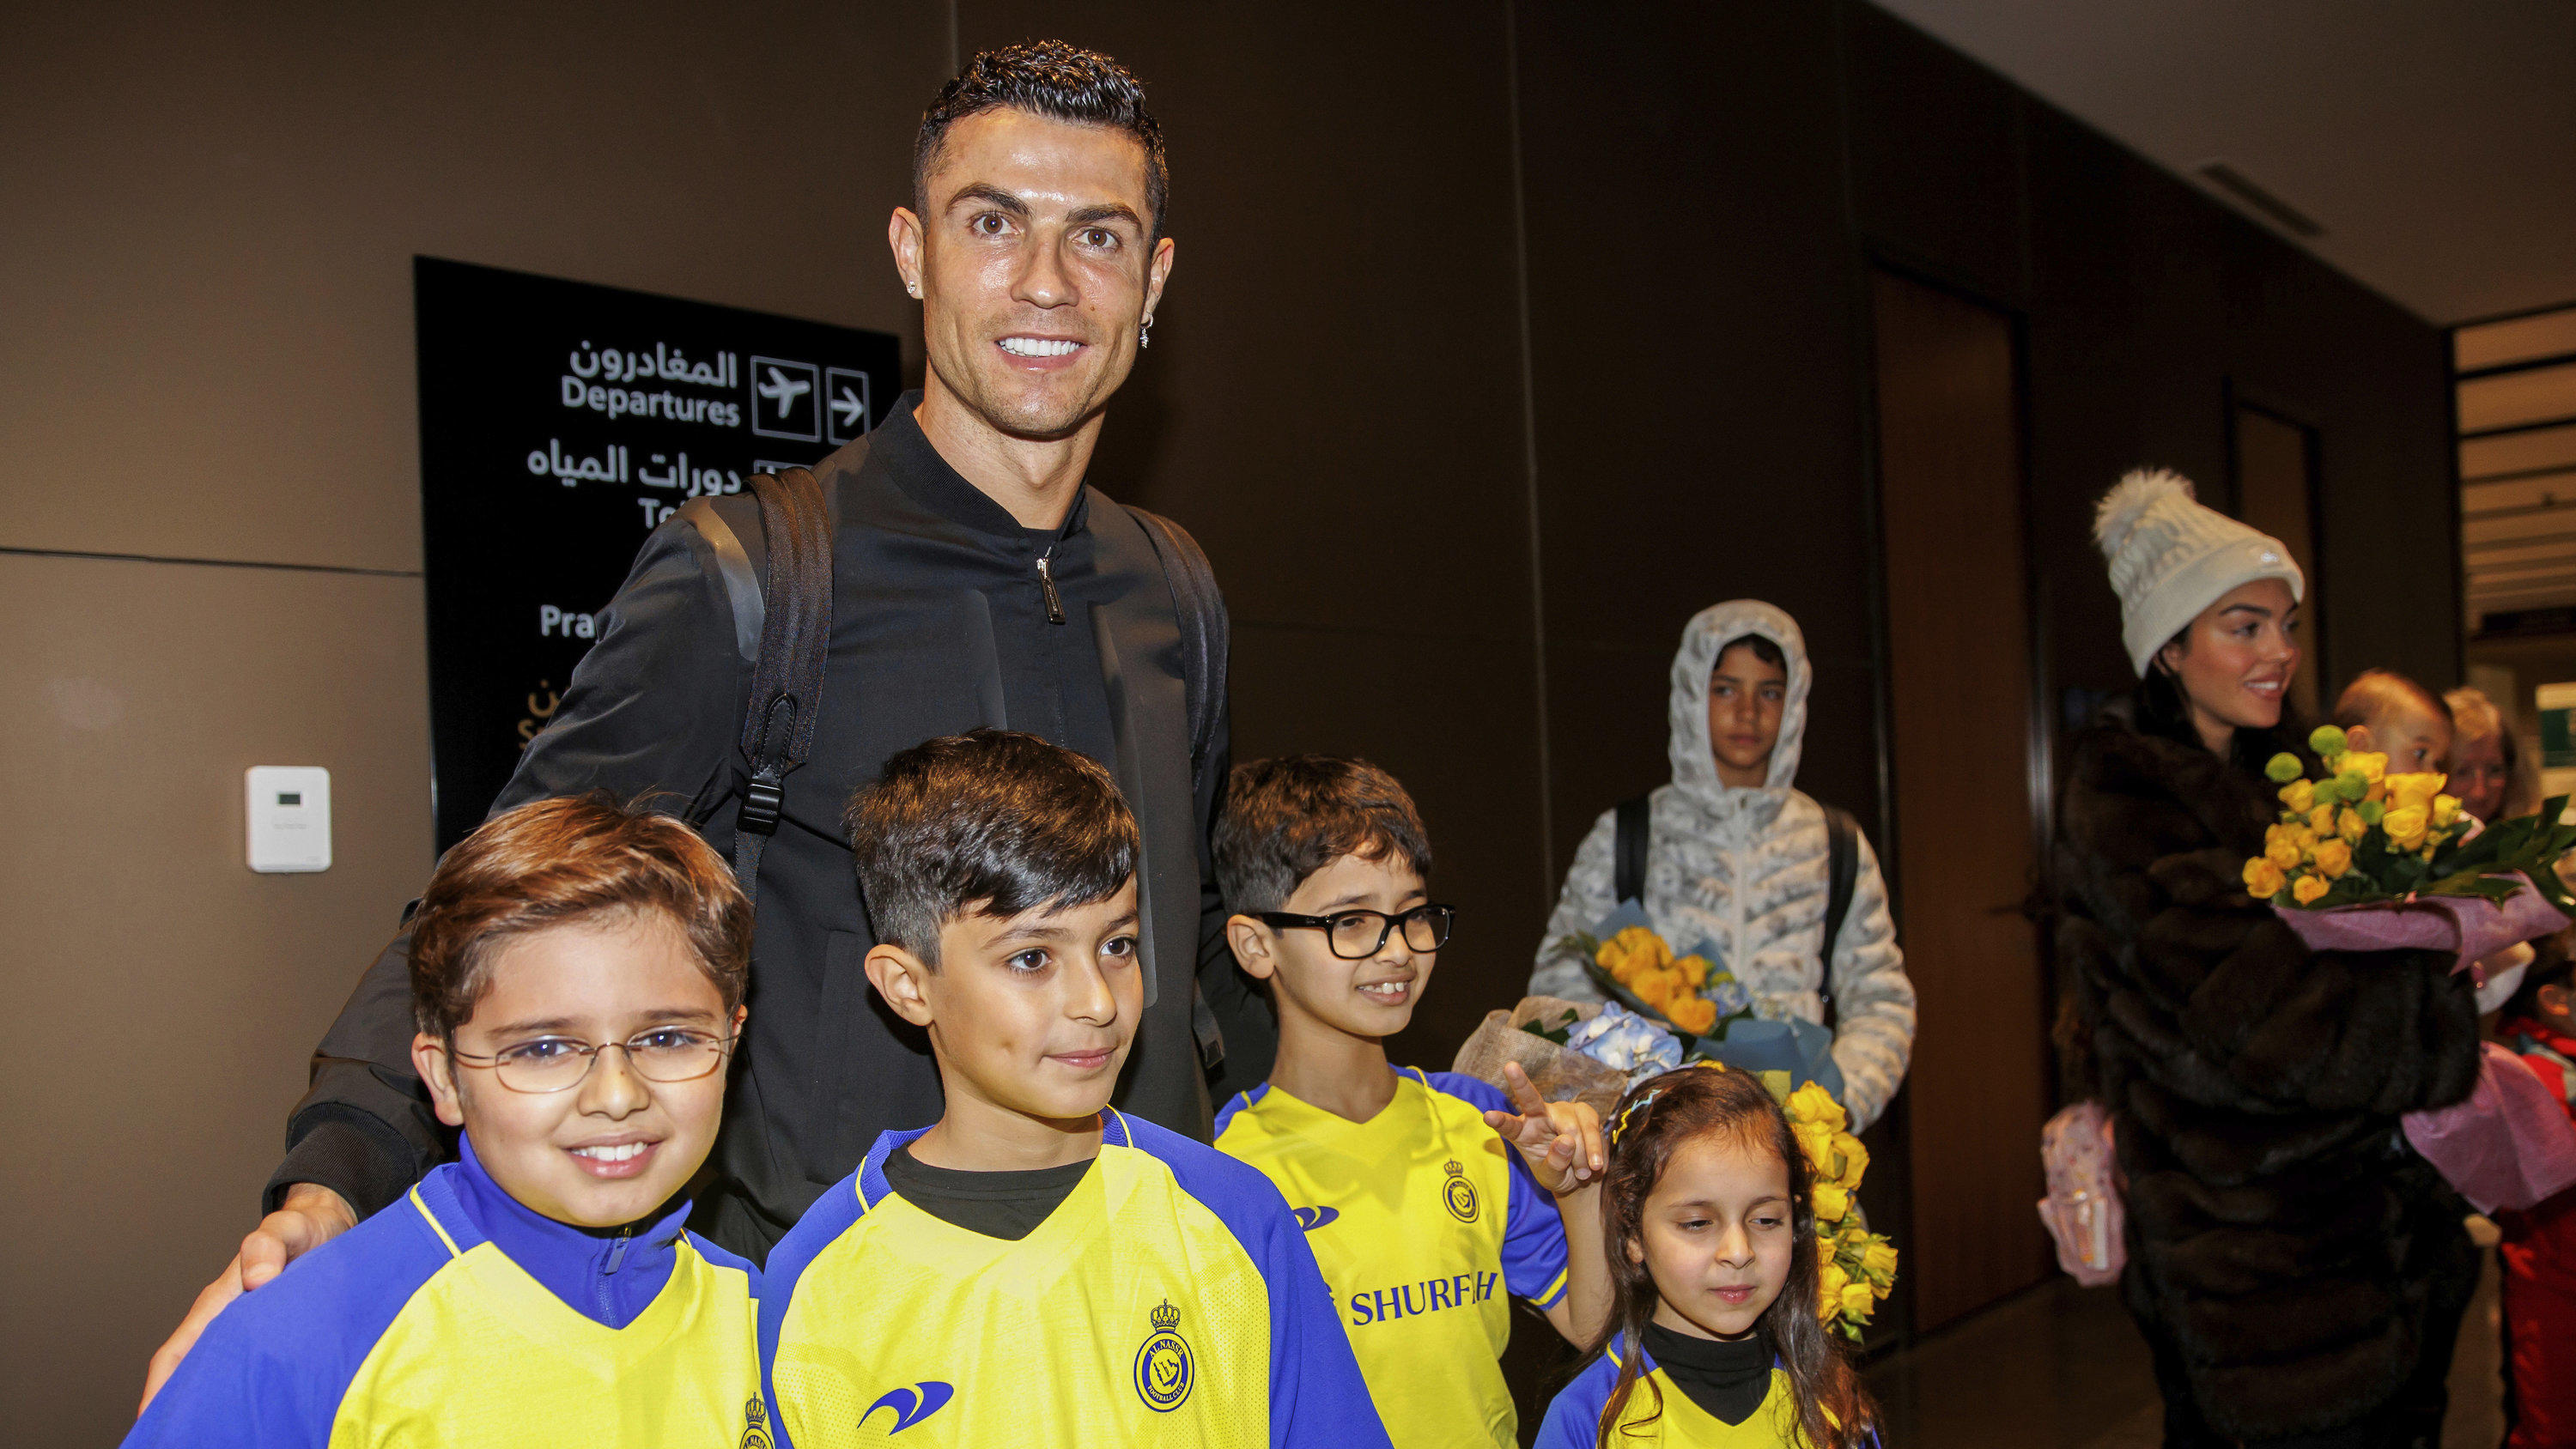 In this photo provided by Al Nassr Club, Cristiano Ronaldo arrives at Riyadh International Airport, late Monday, Jan. 2, 2023. Ronaldo completed a lucrative move to Saudi Arabian club Al Nassr on Friday in a deal that is a landmark moment for Middle 